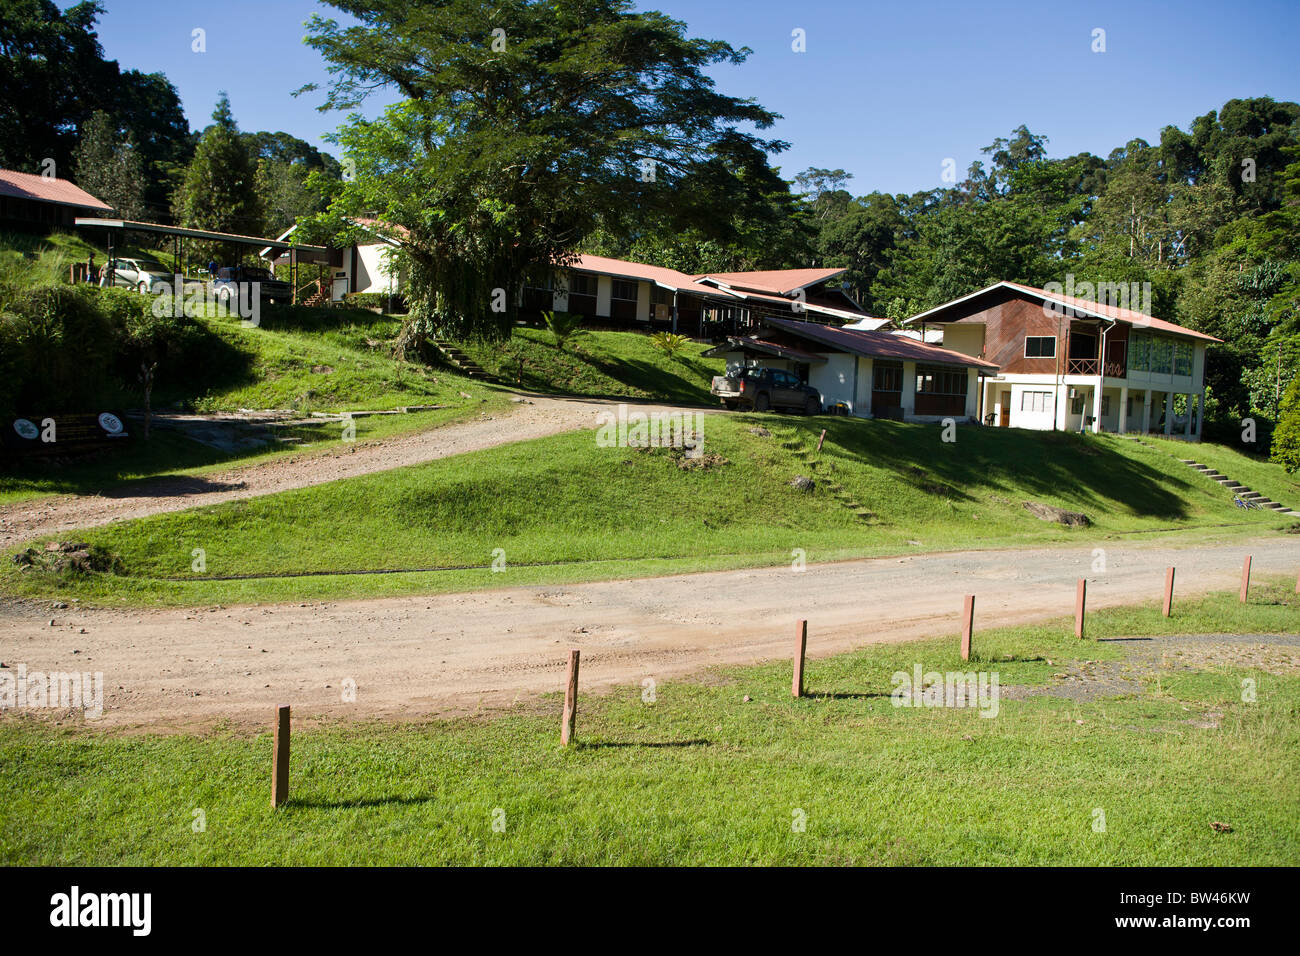 The Danum Valley Field Center in the Danum Valley Conservation Area in Sabah, Borneo, Malaysia Stock Photo